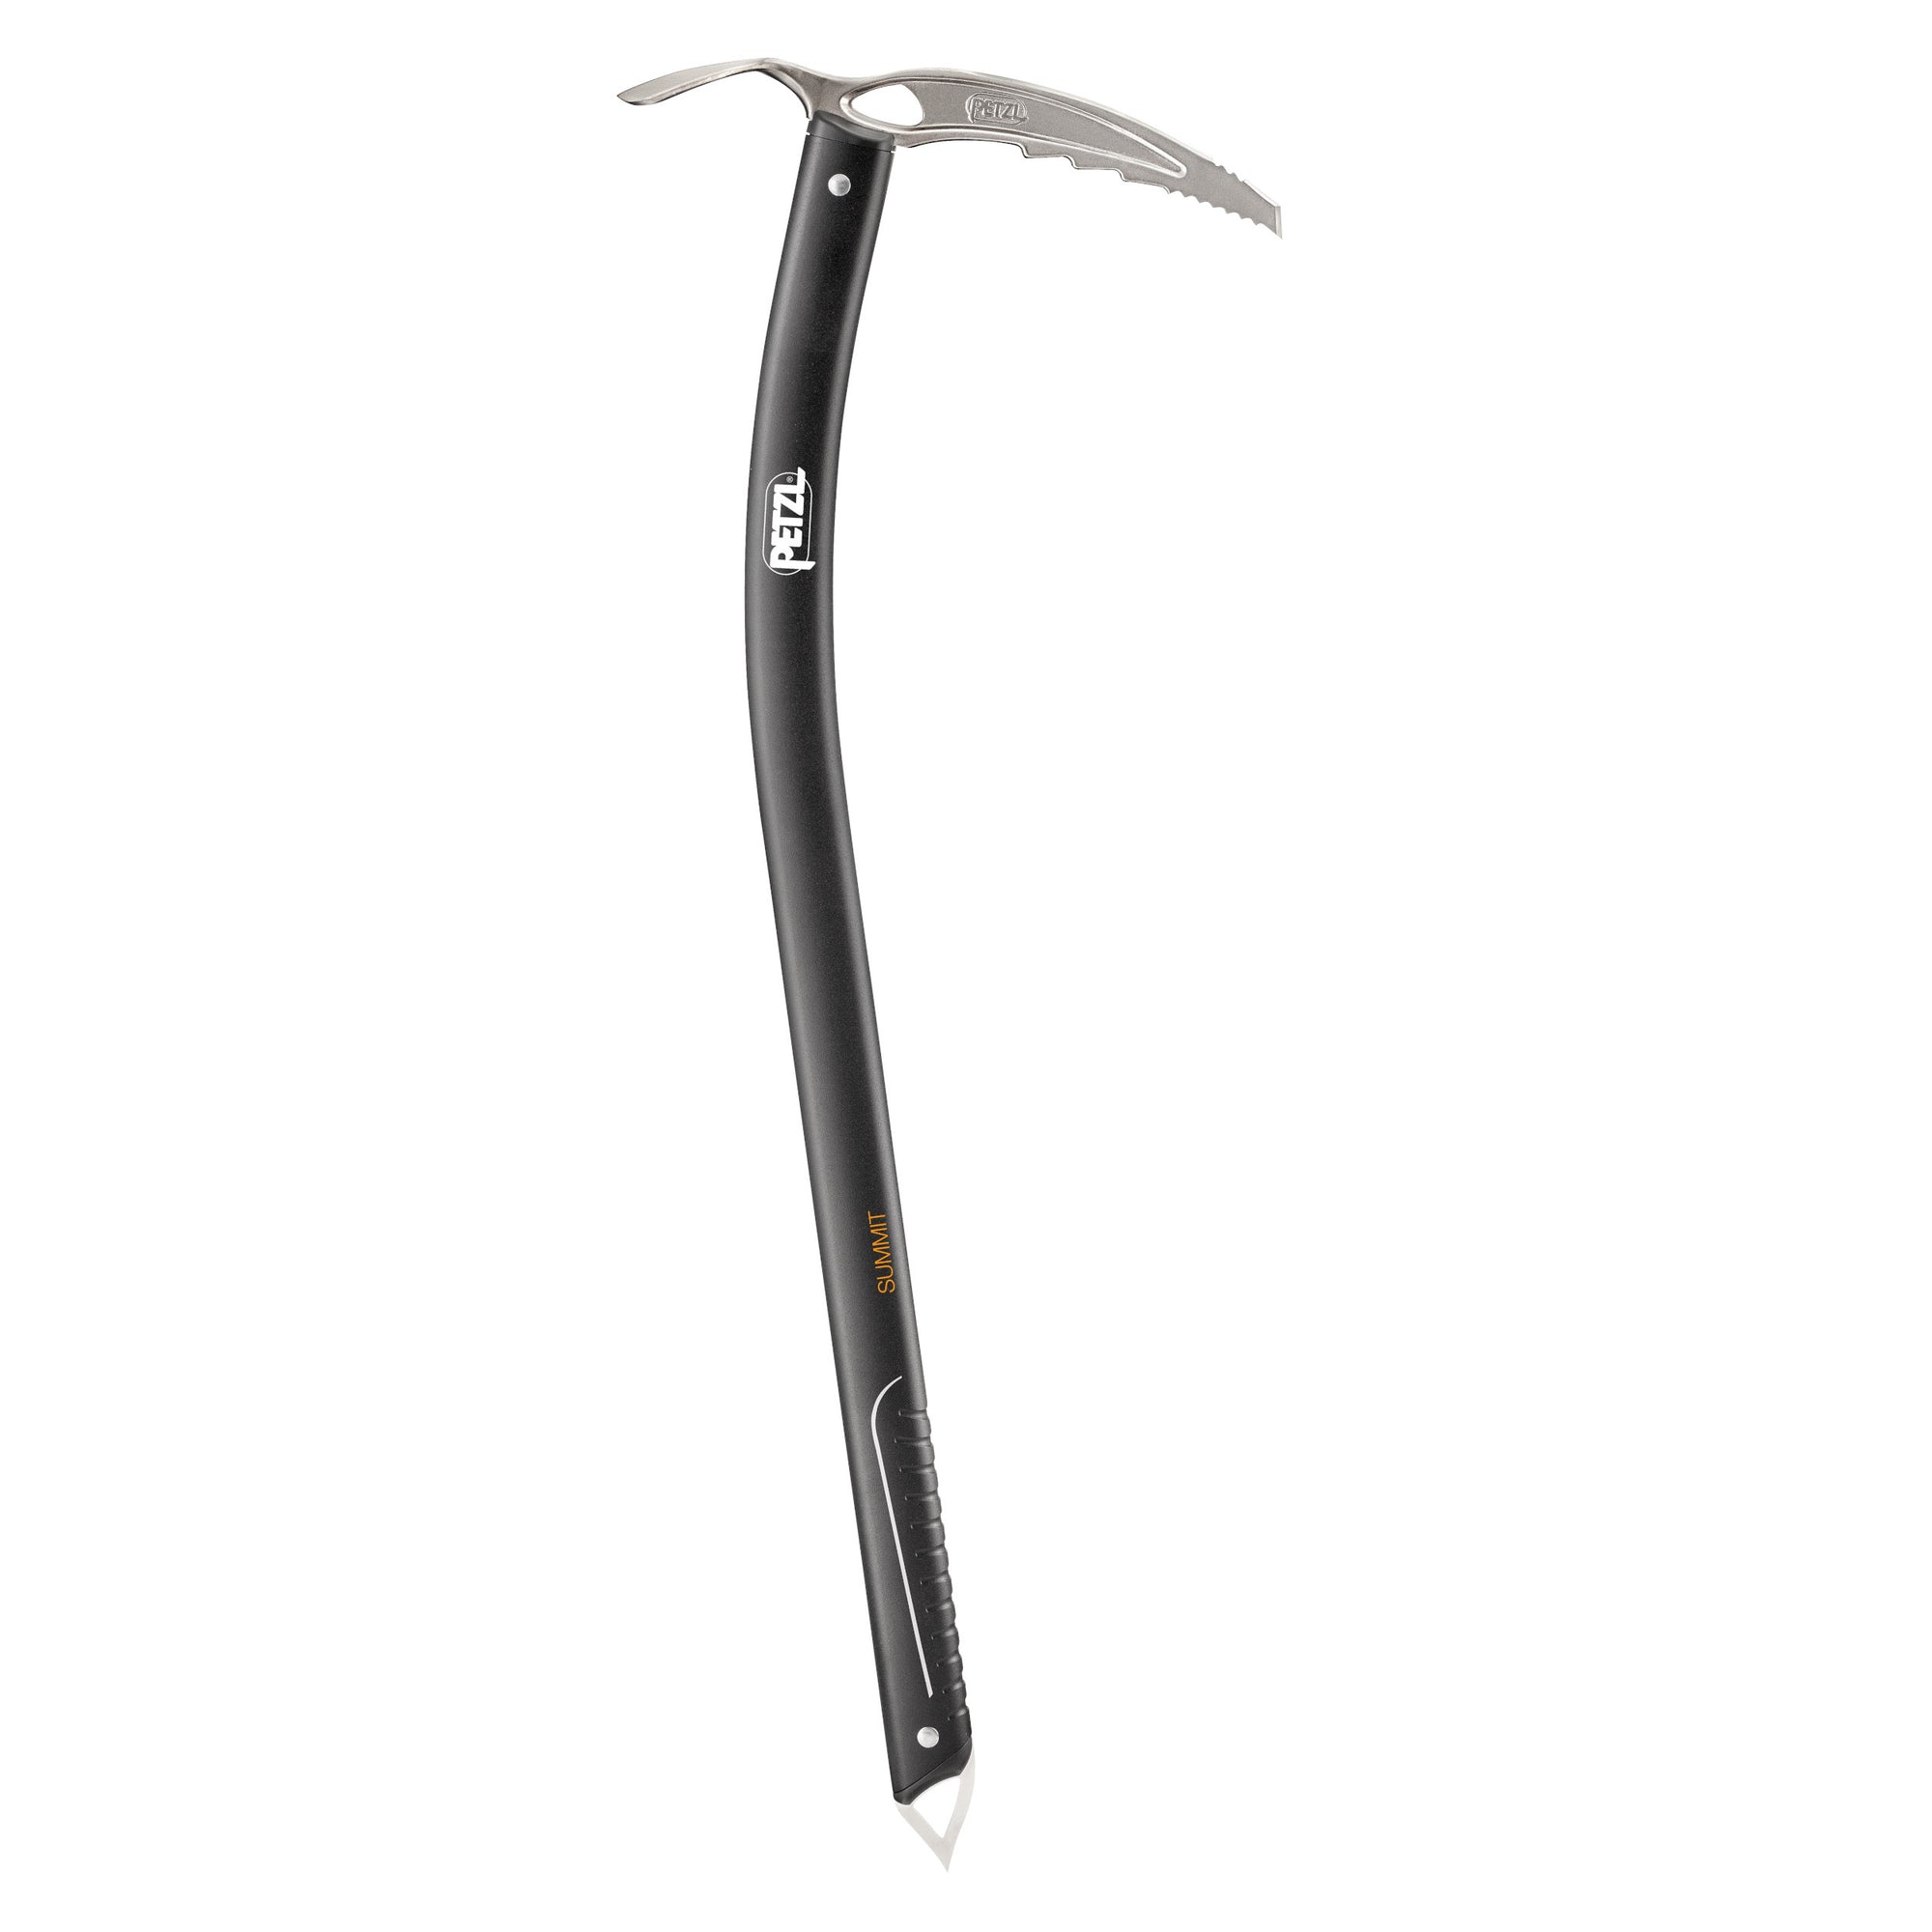 Petzl Summit Ice Axe, shown stood upright with black shaft and silver pick